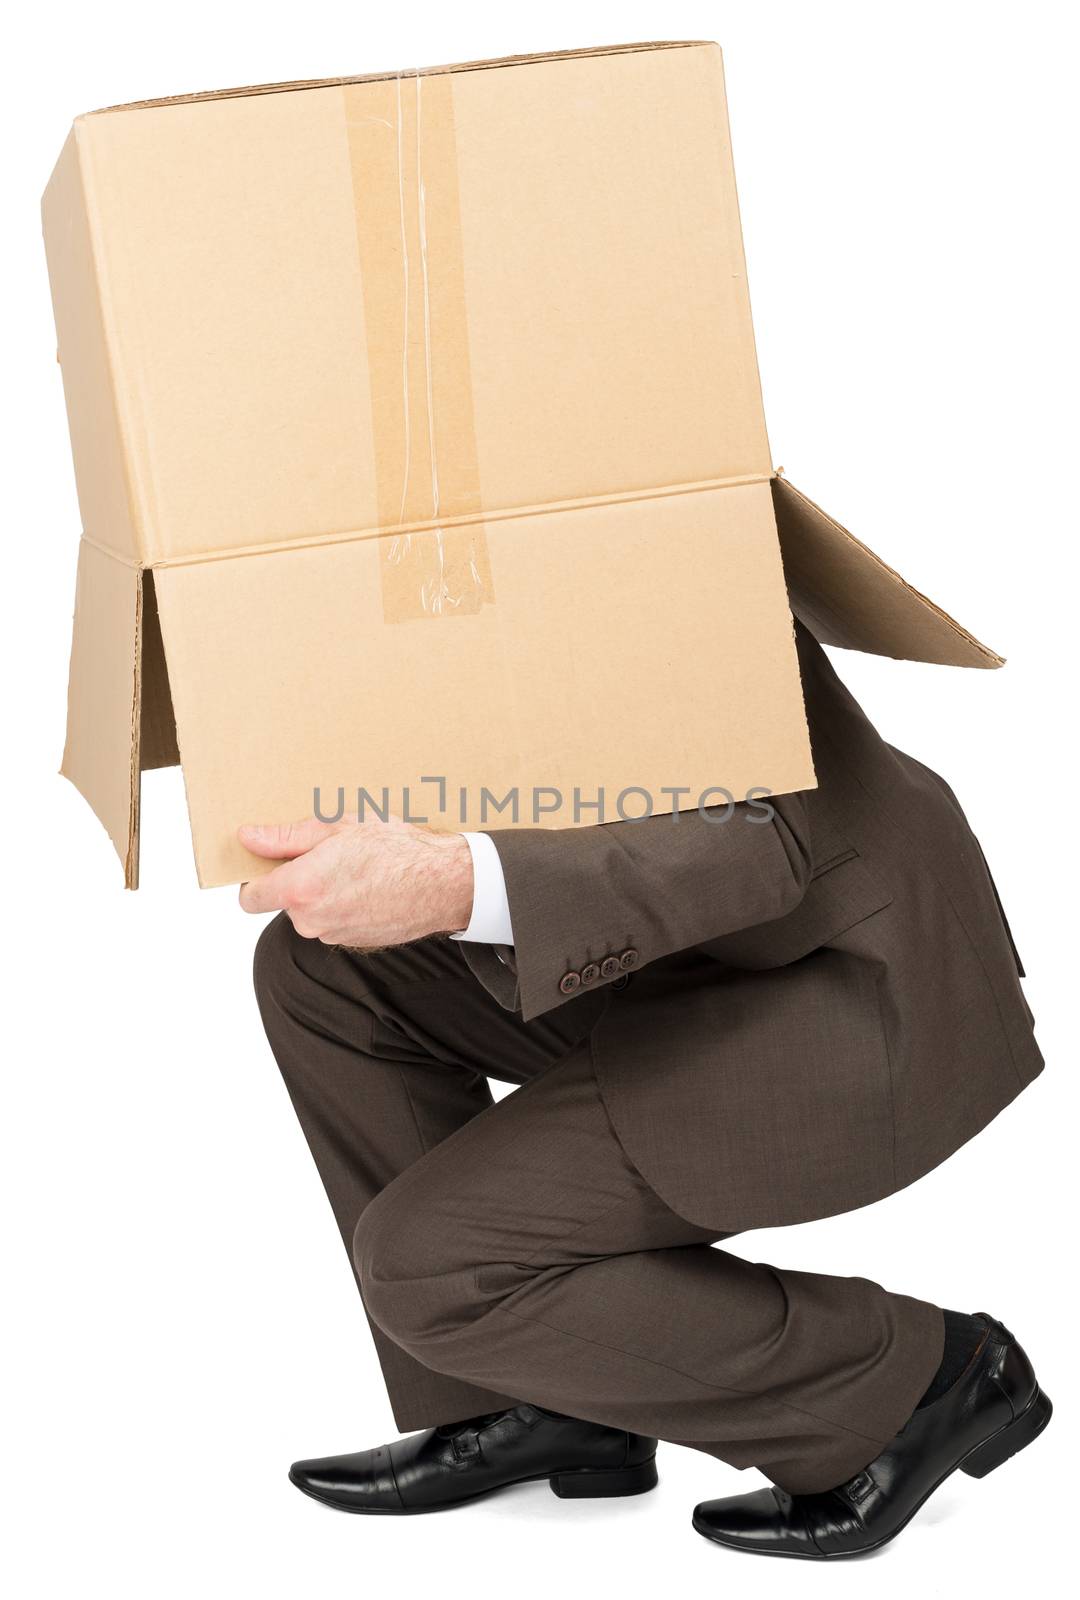 Businessman running with brown box on his head, isolated on white background